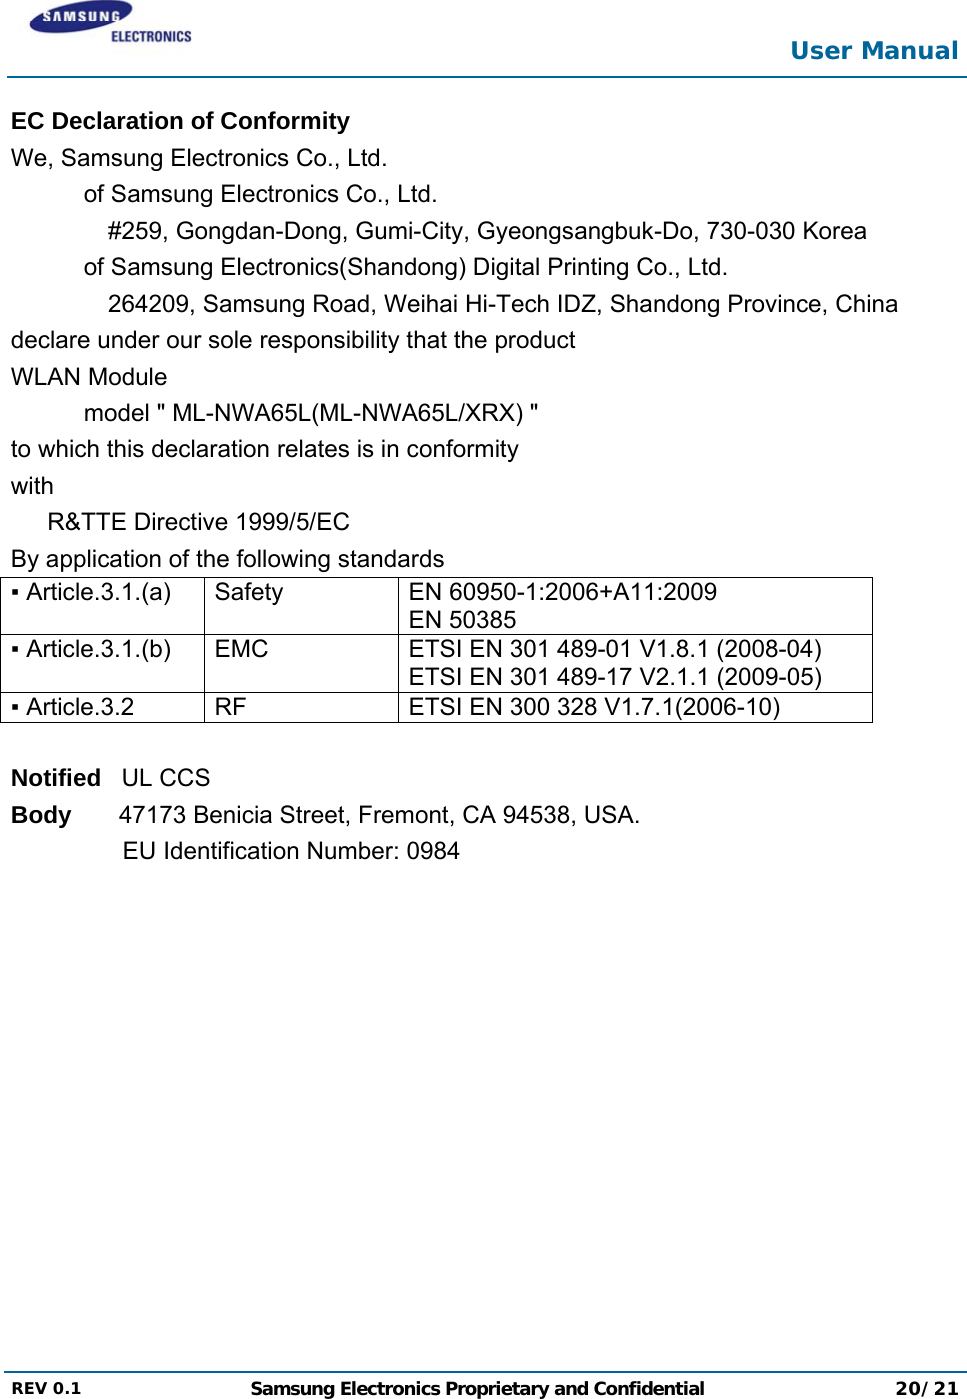  User Manual  REV 0.1  Samsung Electronics Proprietary and Confidential 20/21  EC Declaration of Conformity We, Samsung Electronics Co., Ltd. of Samsung Electronics Co., Ltd. #259, Gongdan-Dong, Gumi-City, Gyeongsangbuk-Do, 730-030 Korea of Samsung Electronics(Shandong) Digital Printing Co., Ltd. 264209, Samsung Road, Weihai Hi-Tech IDZ, Shandong Province, China declare under our sole responsibility that the product WLAN Module model &quot; ML-NWA65L(ML-NWA65L/XRX) &quot; to which this declaration relates is in conformity with R&amp;TTE Directive 1999/5/EC By application of the following standards ▪ Article.3.1.(a)  Safety  EN 60950-1:2006+A11:2009 EN 50385▪ Article.3.1.(b)  EMC  ETSI EN 301 489-01 V1.8.1 (2008-04) ETSI EN 301 489-17 V2.1.1 (2009-05) ▪ Article.3.2  RF  ETSI EN 300 328 V1.7.1(2006-10)  Notified   UL CCS Body       47173 Benicia Street, Fremont, CA 94538, USA. EU Identification Number: 0984 